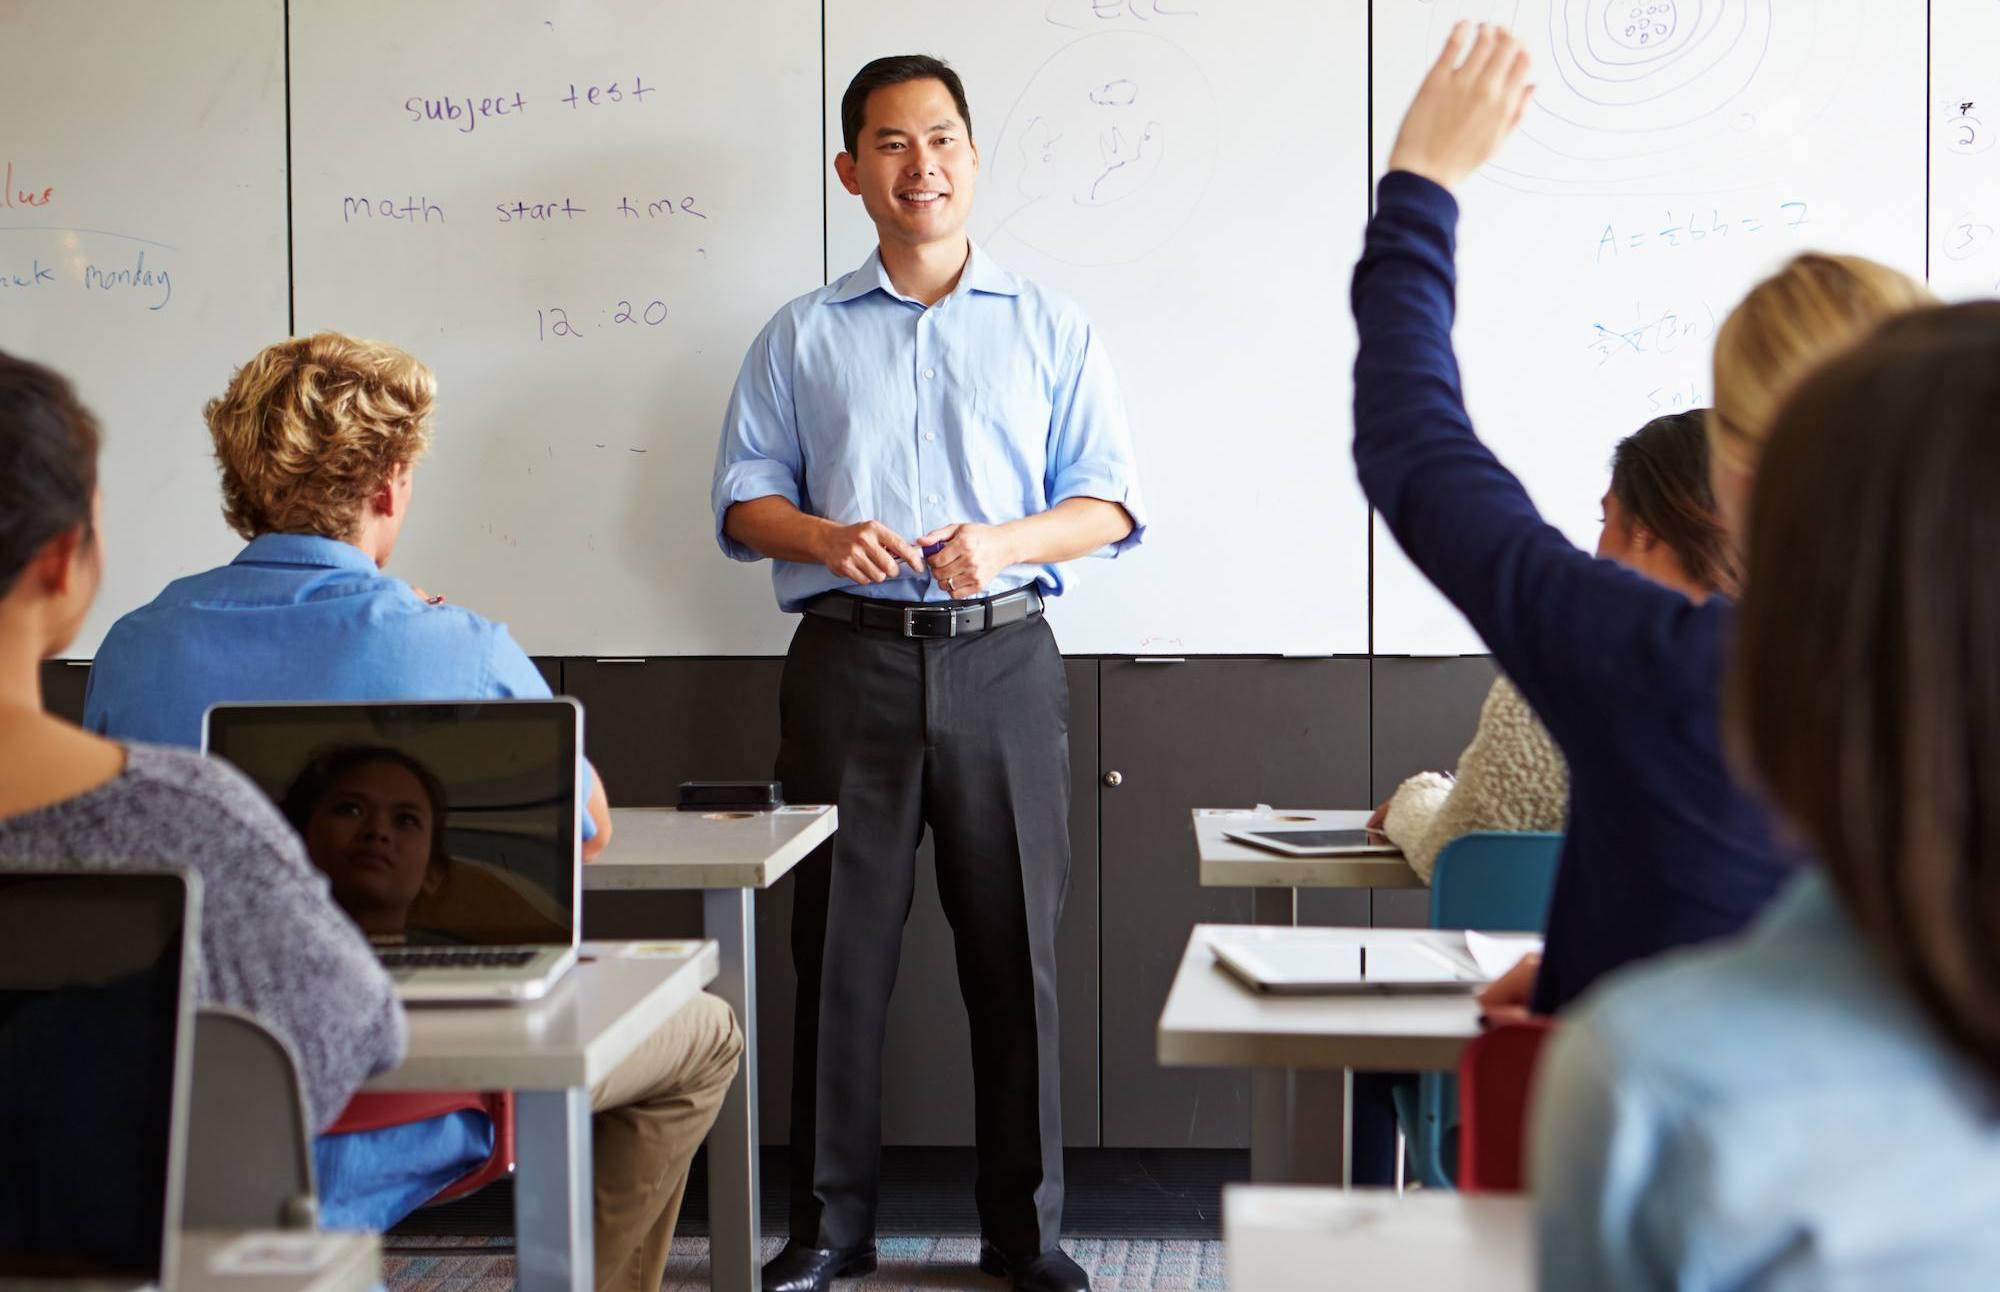 A high school math teacher stands in front of his class, smiling at a student raising her hand.